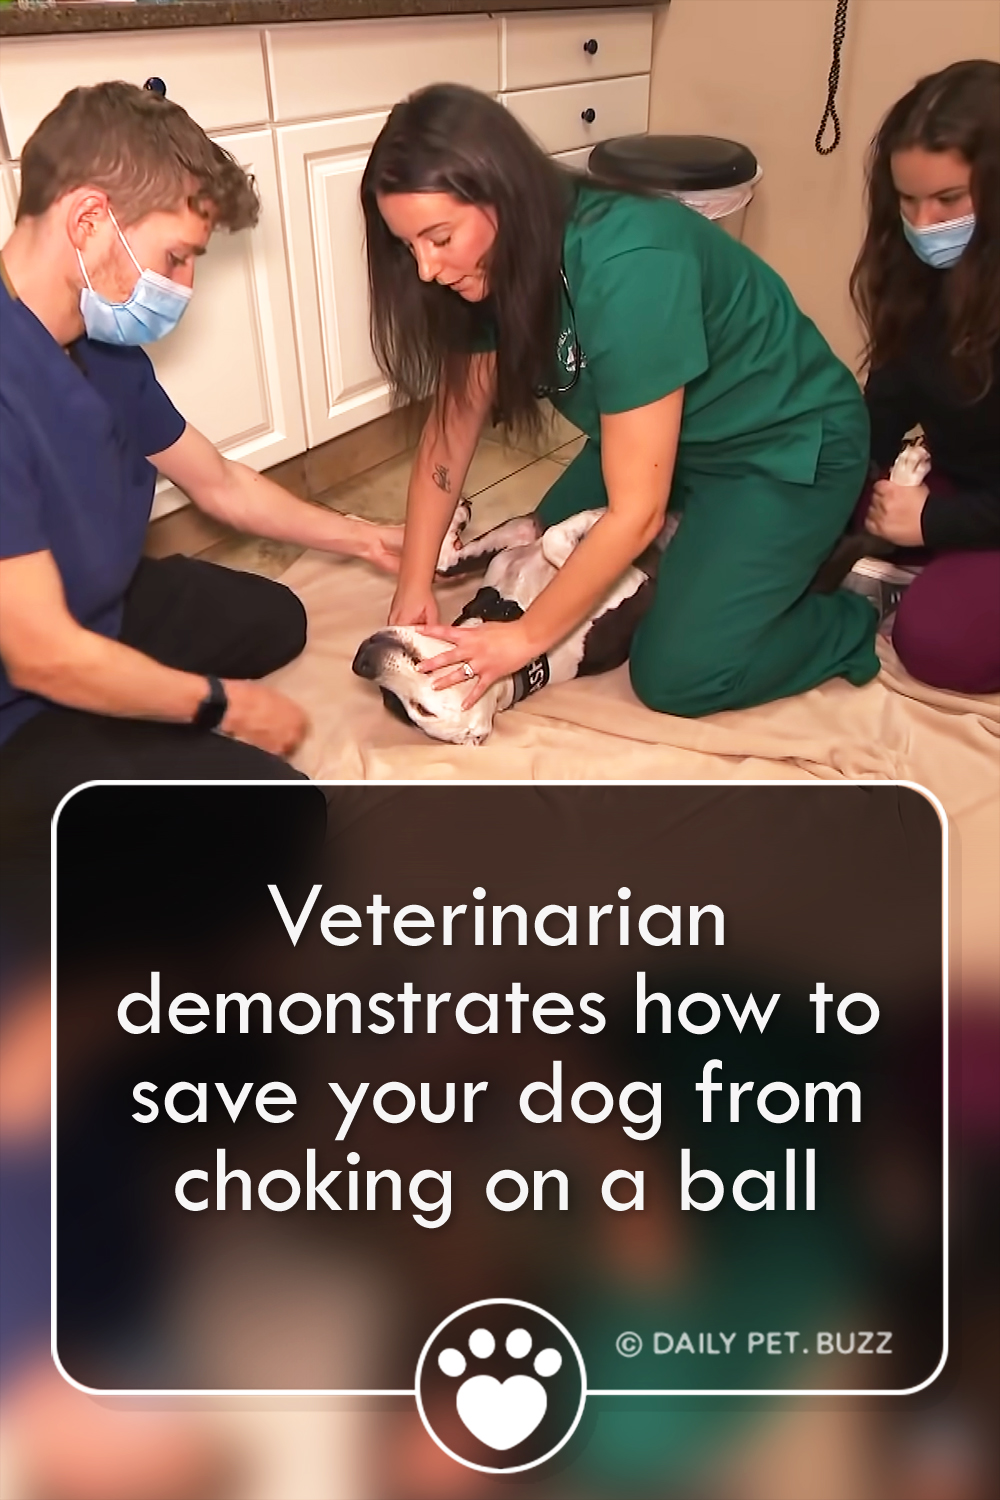 Veterinarian demonstrates how to save your dog from choking on a ball